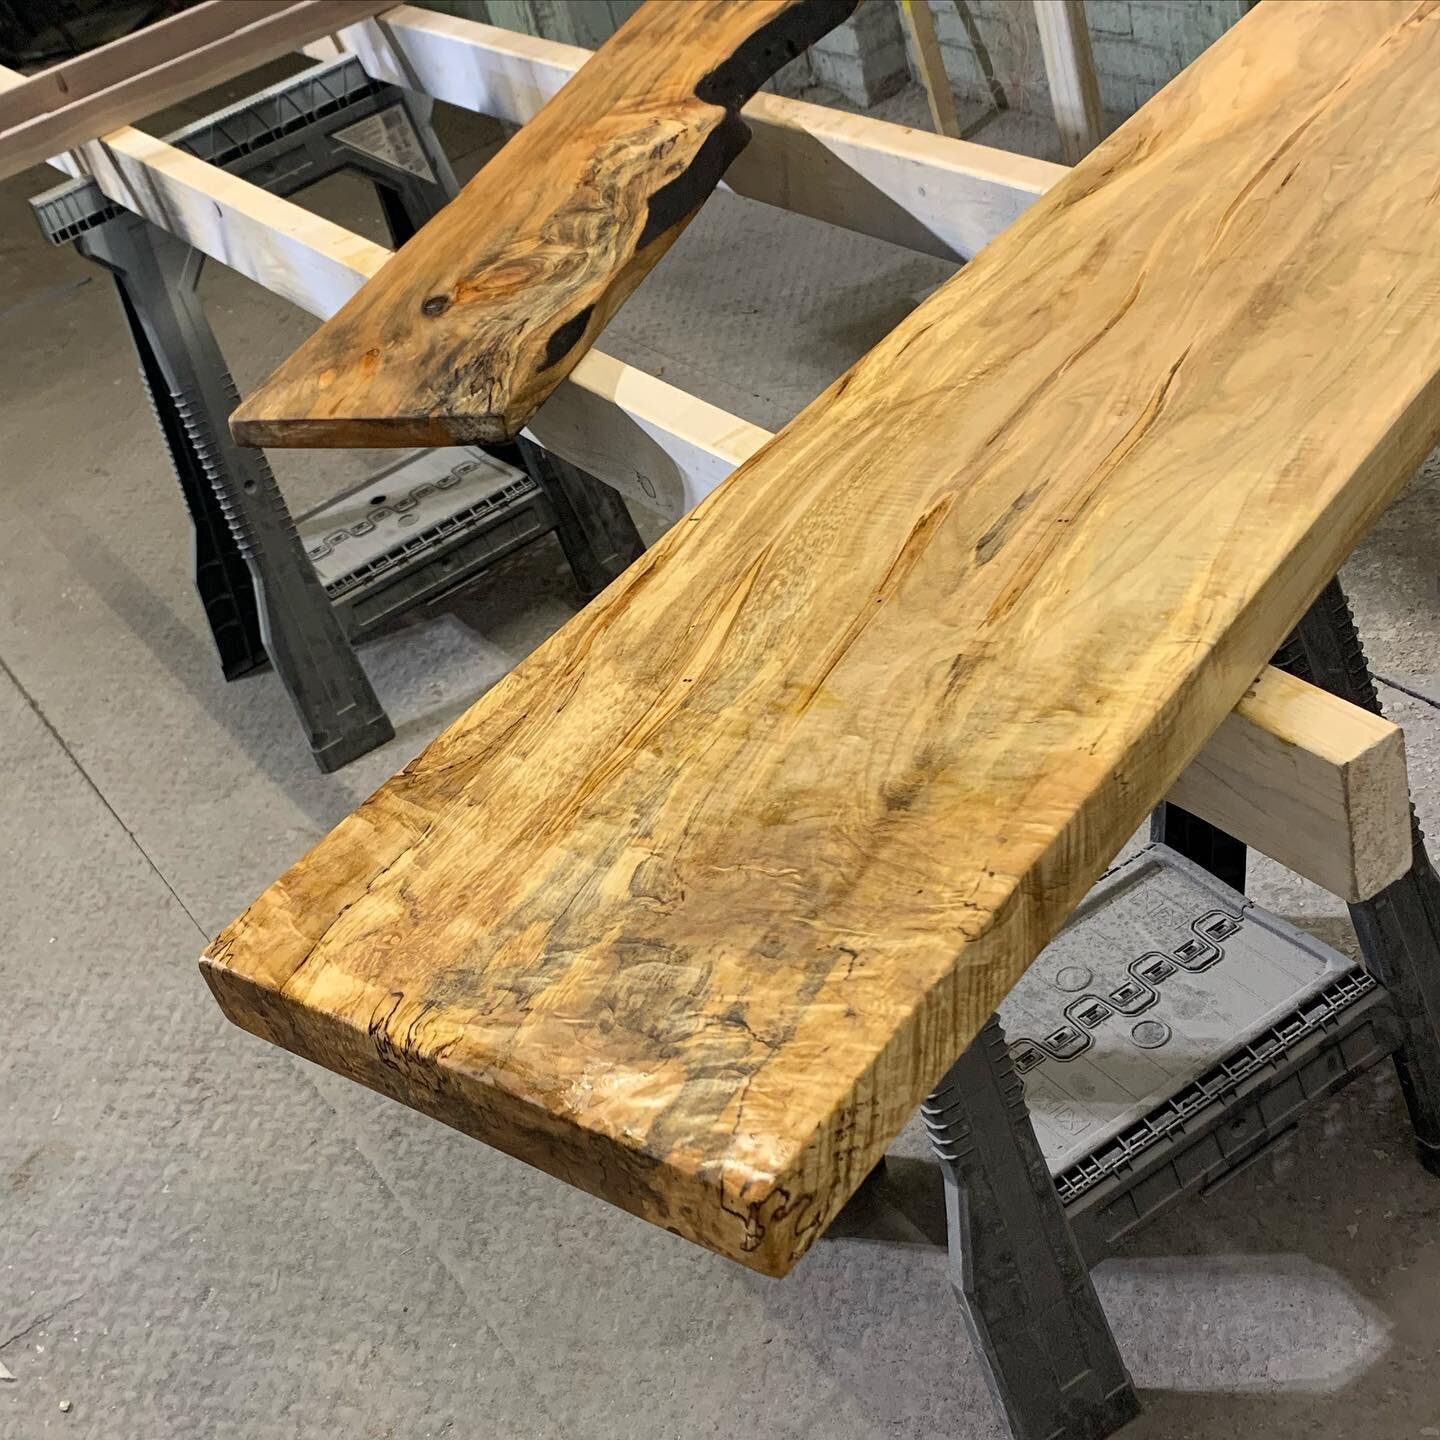 Some finish going on this beautiful ambrosia maple for a custom entry table! #custom #custommade #furnituredesign #furniture #interiordesign #design #woodworker #woodwork #artisan #table